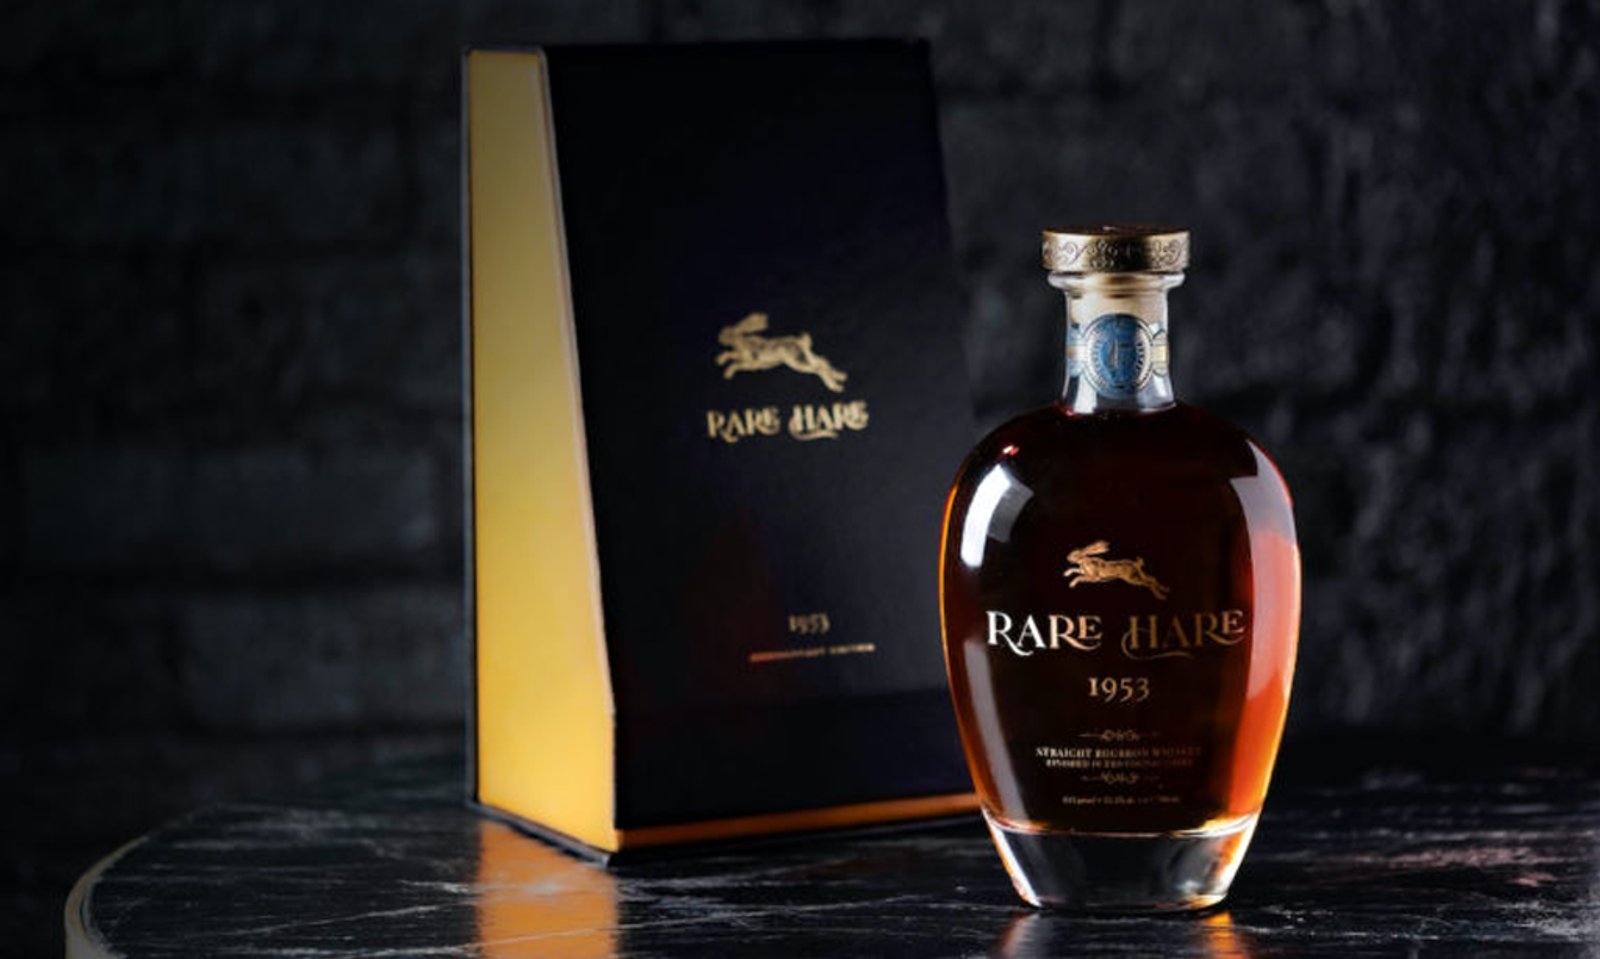 PLBY Group Enters Spirits Sector With Rare Hare Label